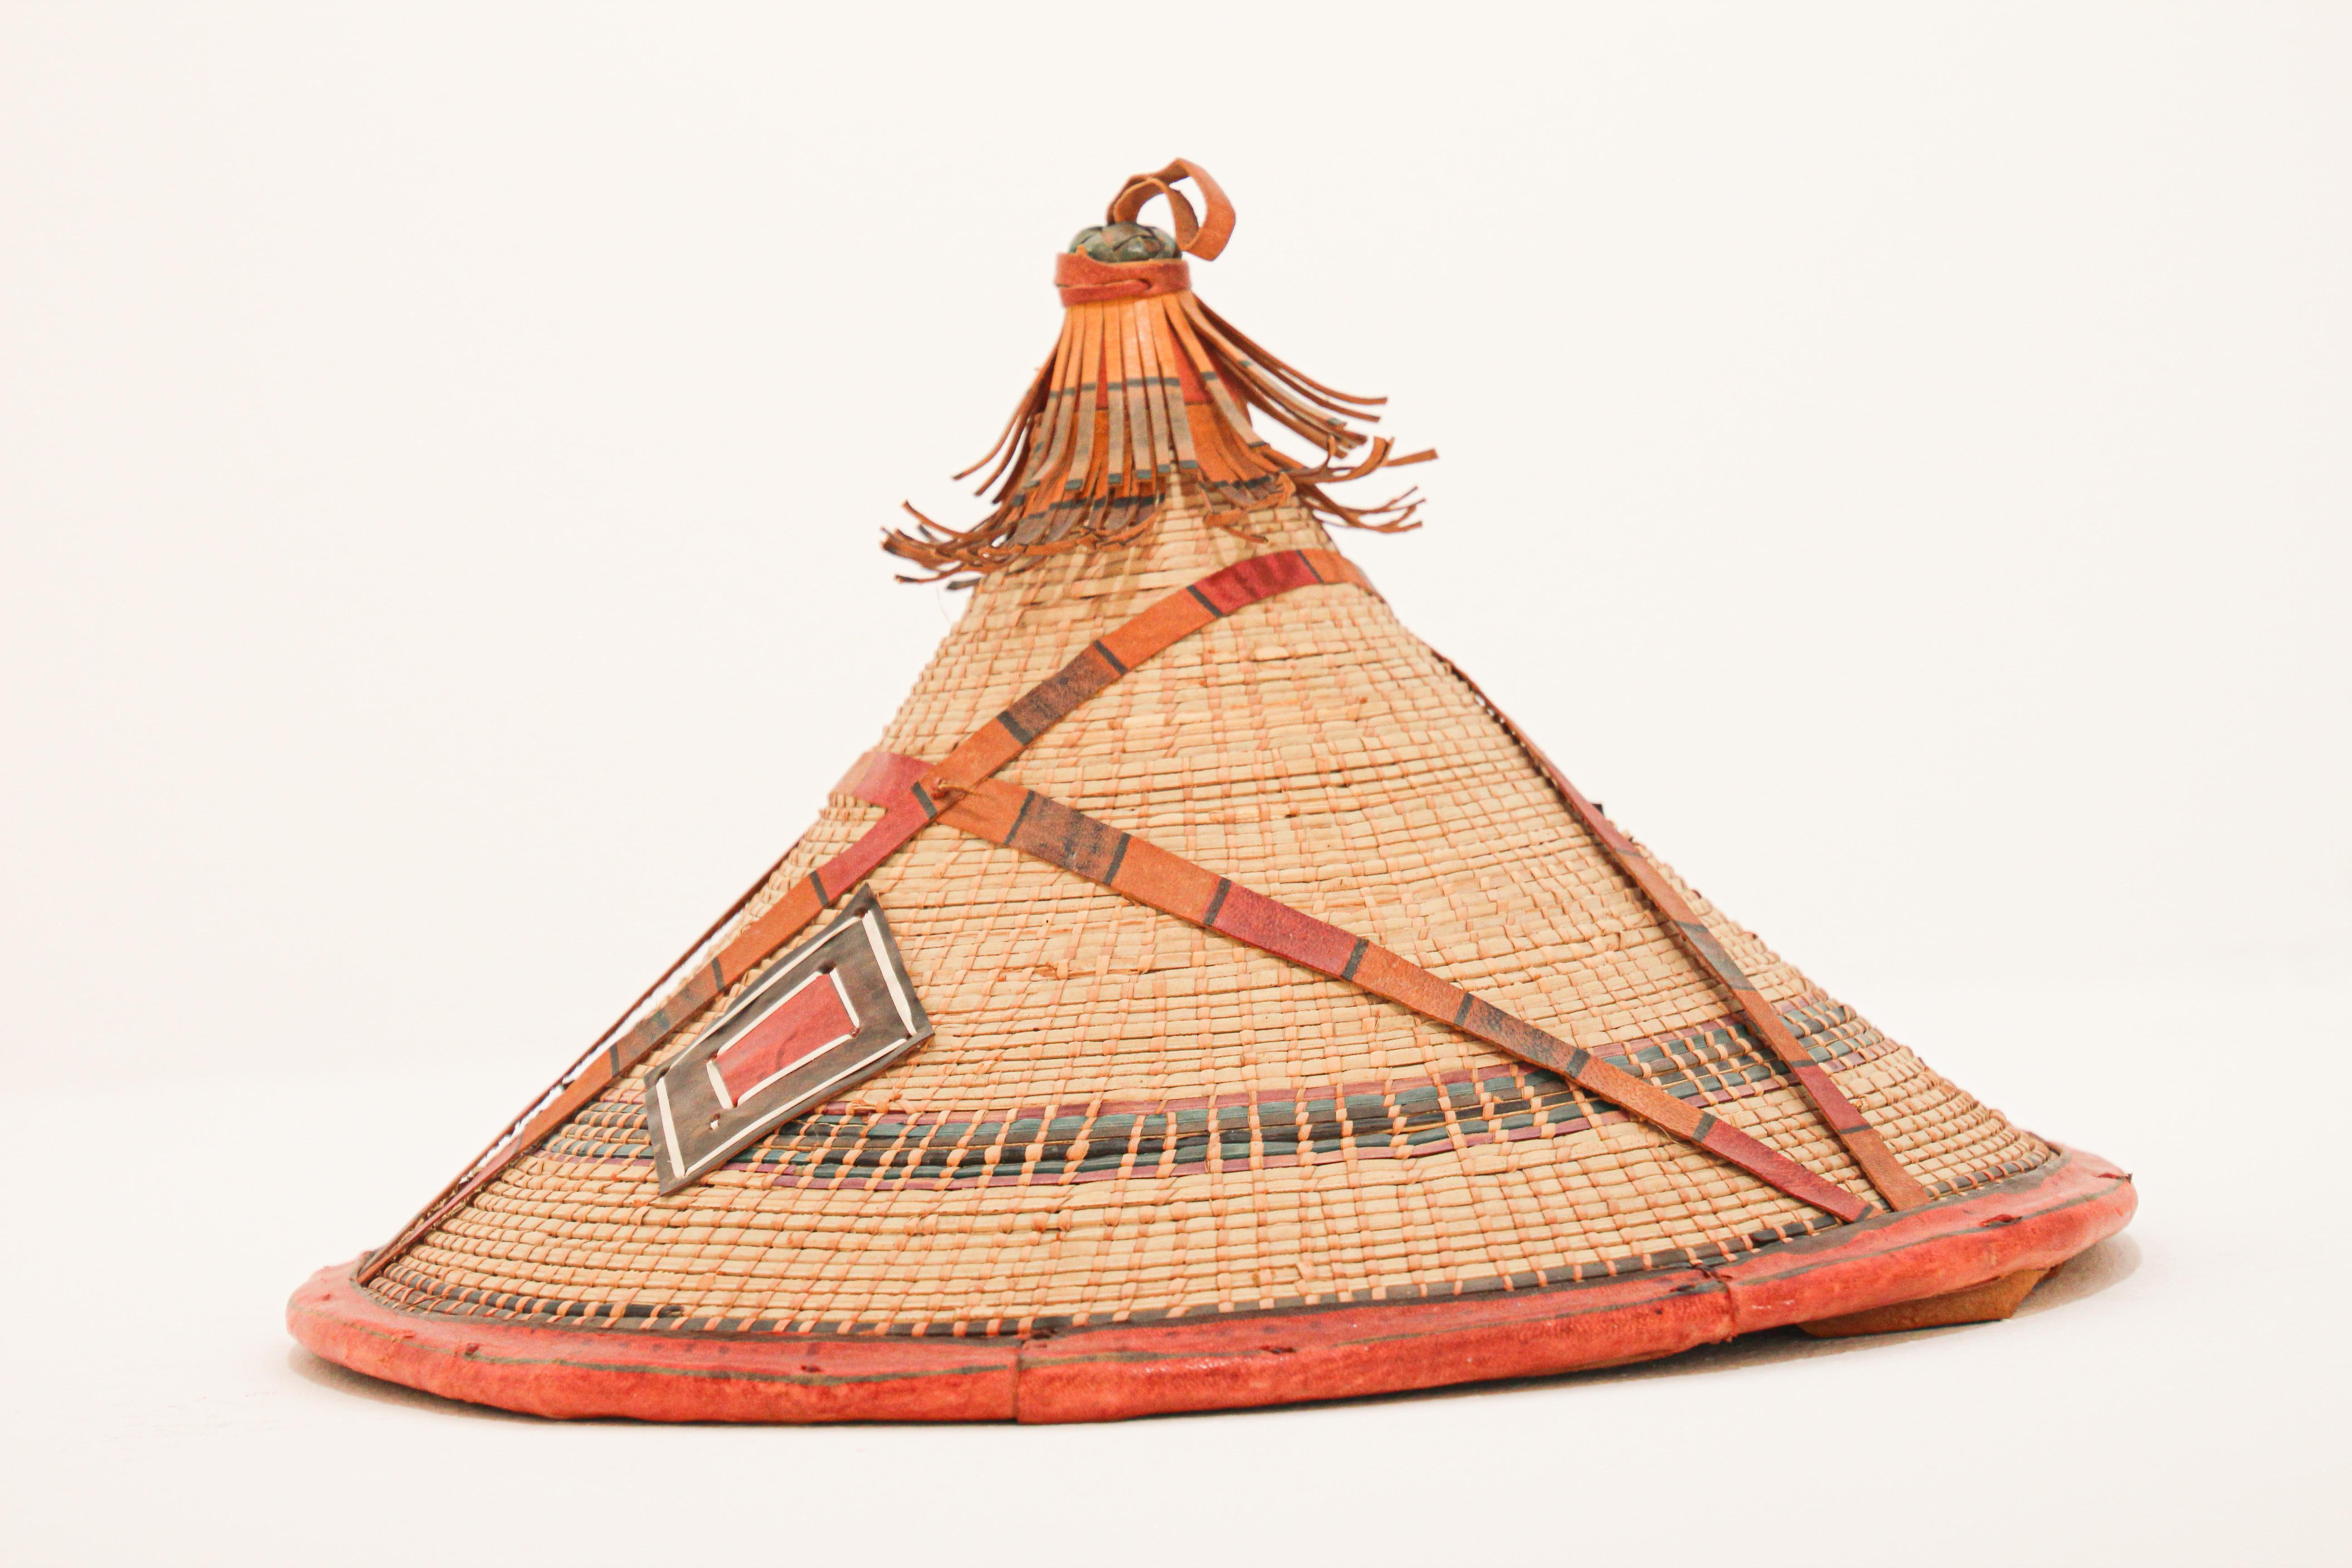 Conical leather and straw tribal Fulani hat, Mali West Africa
Folk Art organic fiber hat with leather applications that comes from the Fulani people in West Africa.
It is typically worn by the Wodaabe, a nomadic cattle-herder subgroup of the